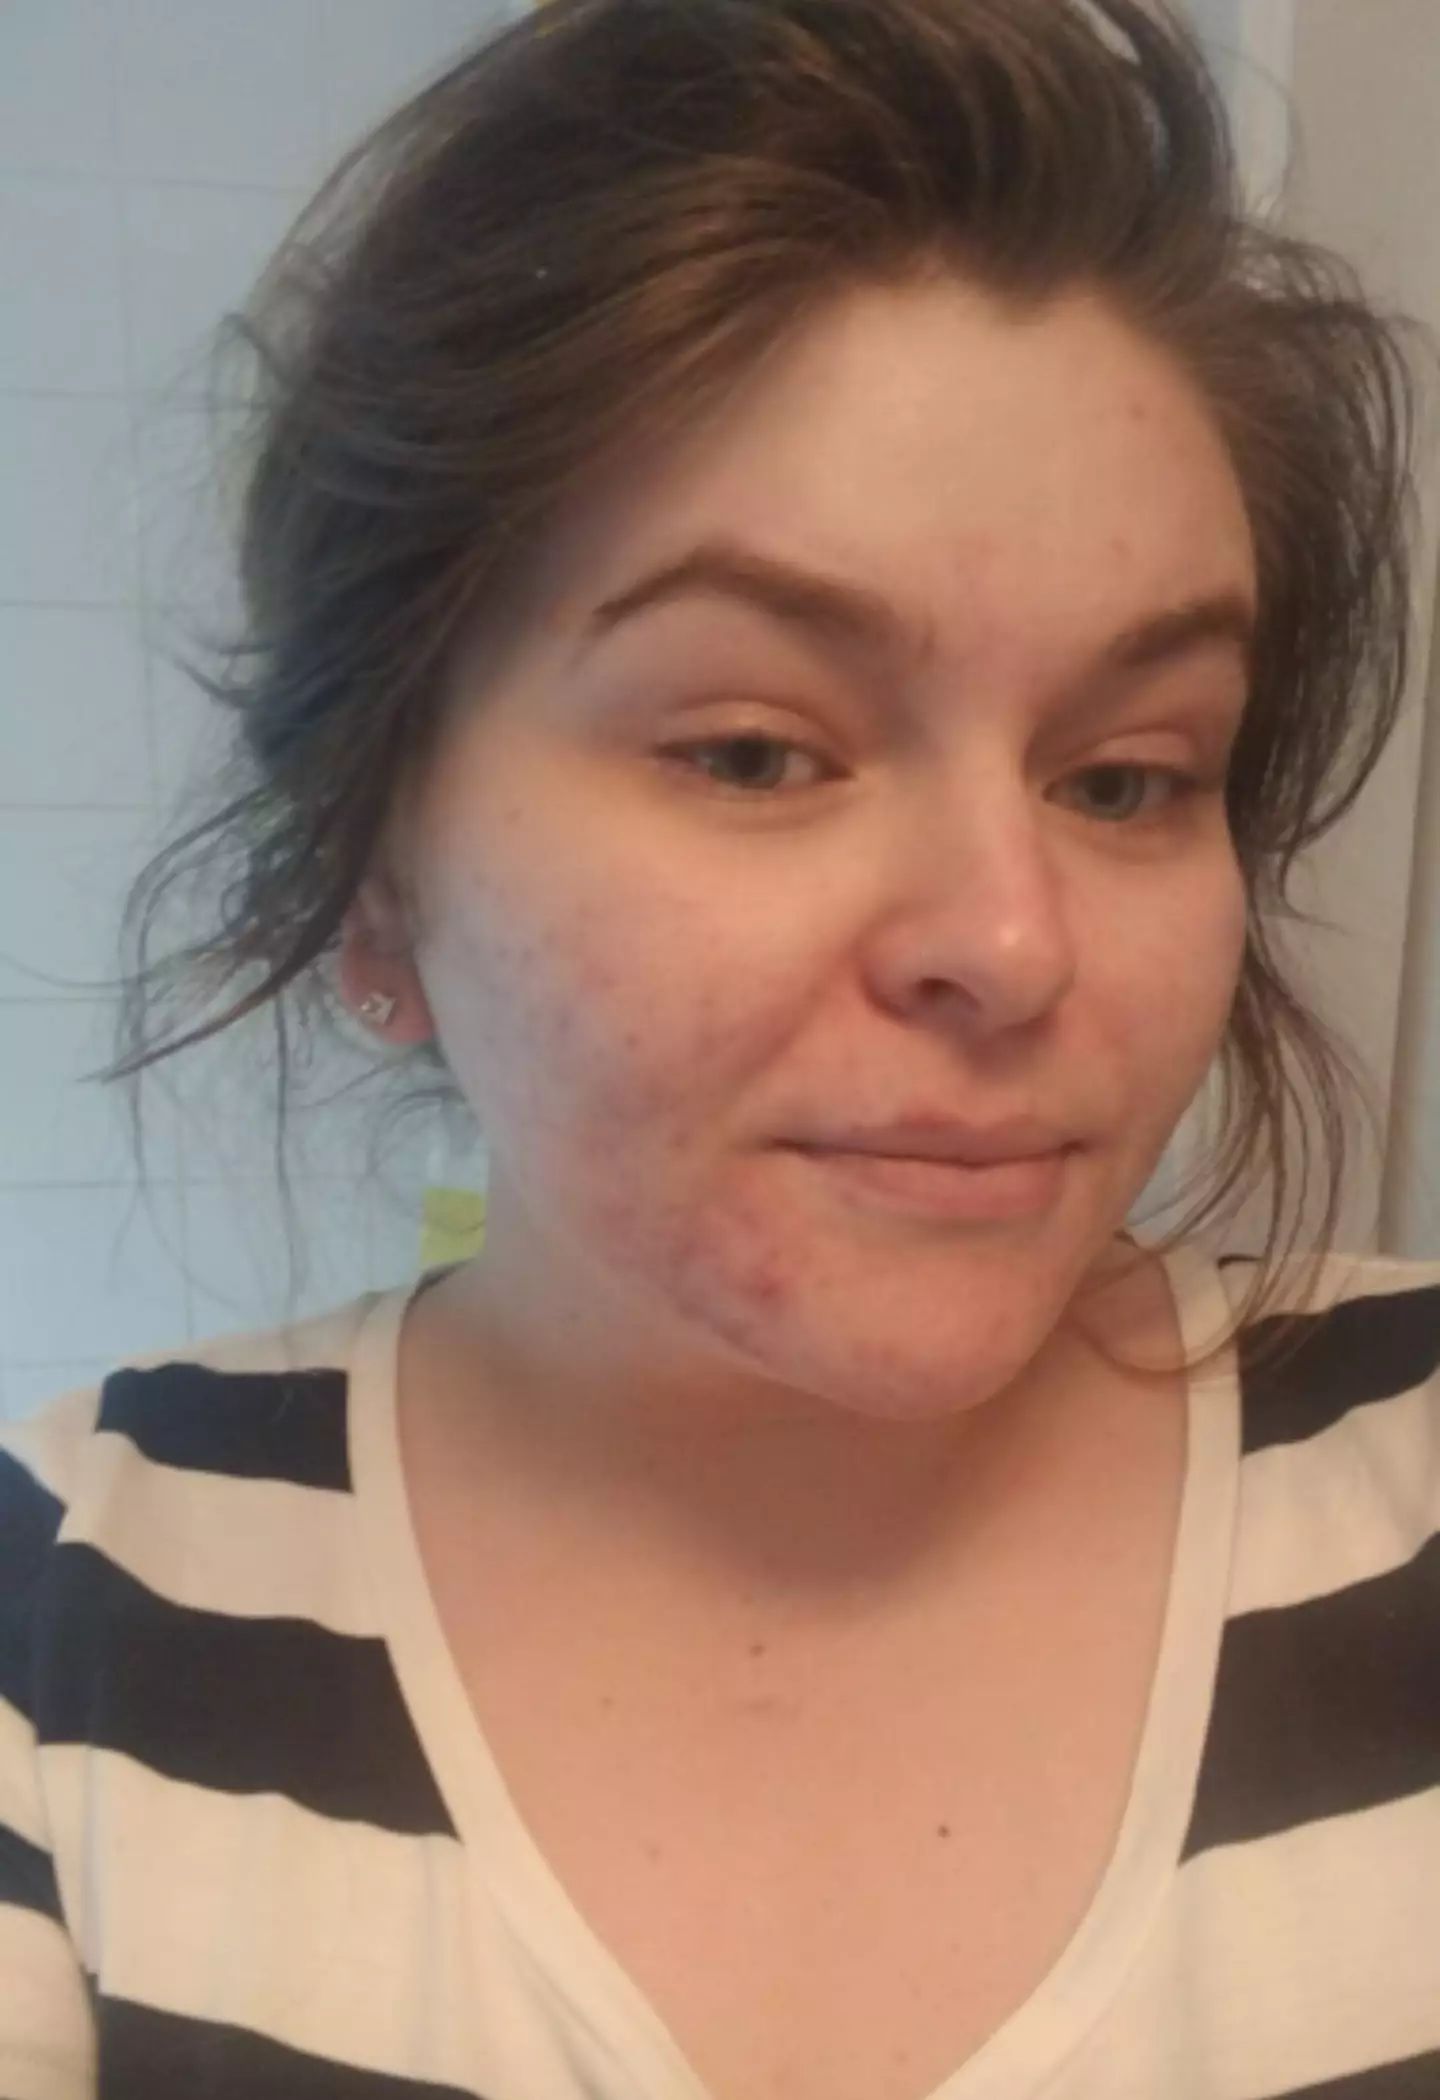 Her skin left her too self-conscious to leave the house without makeup.